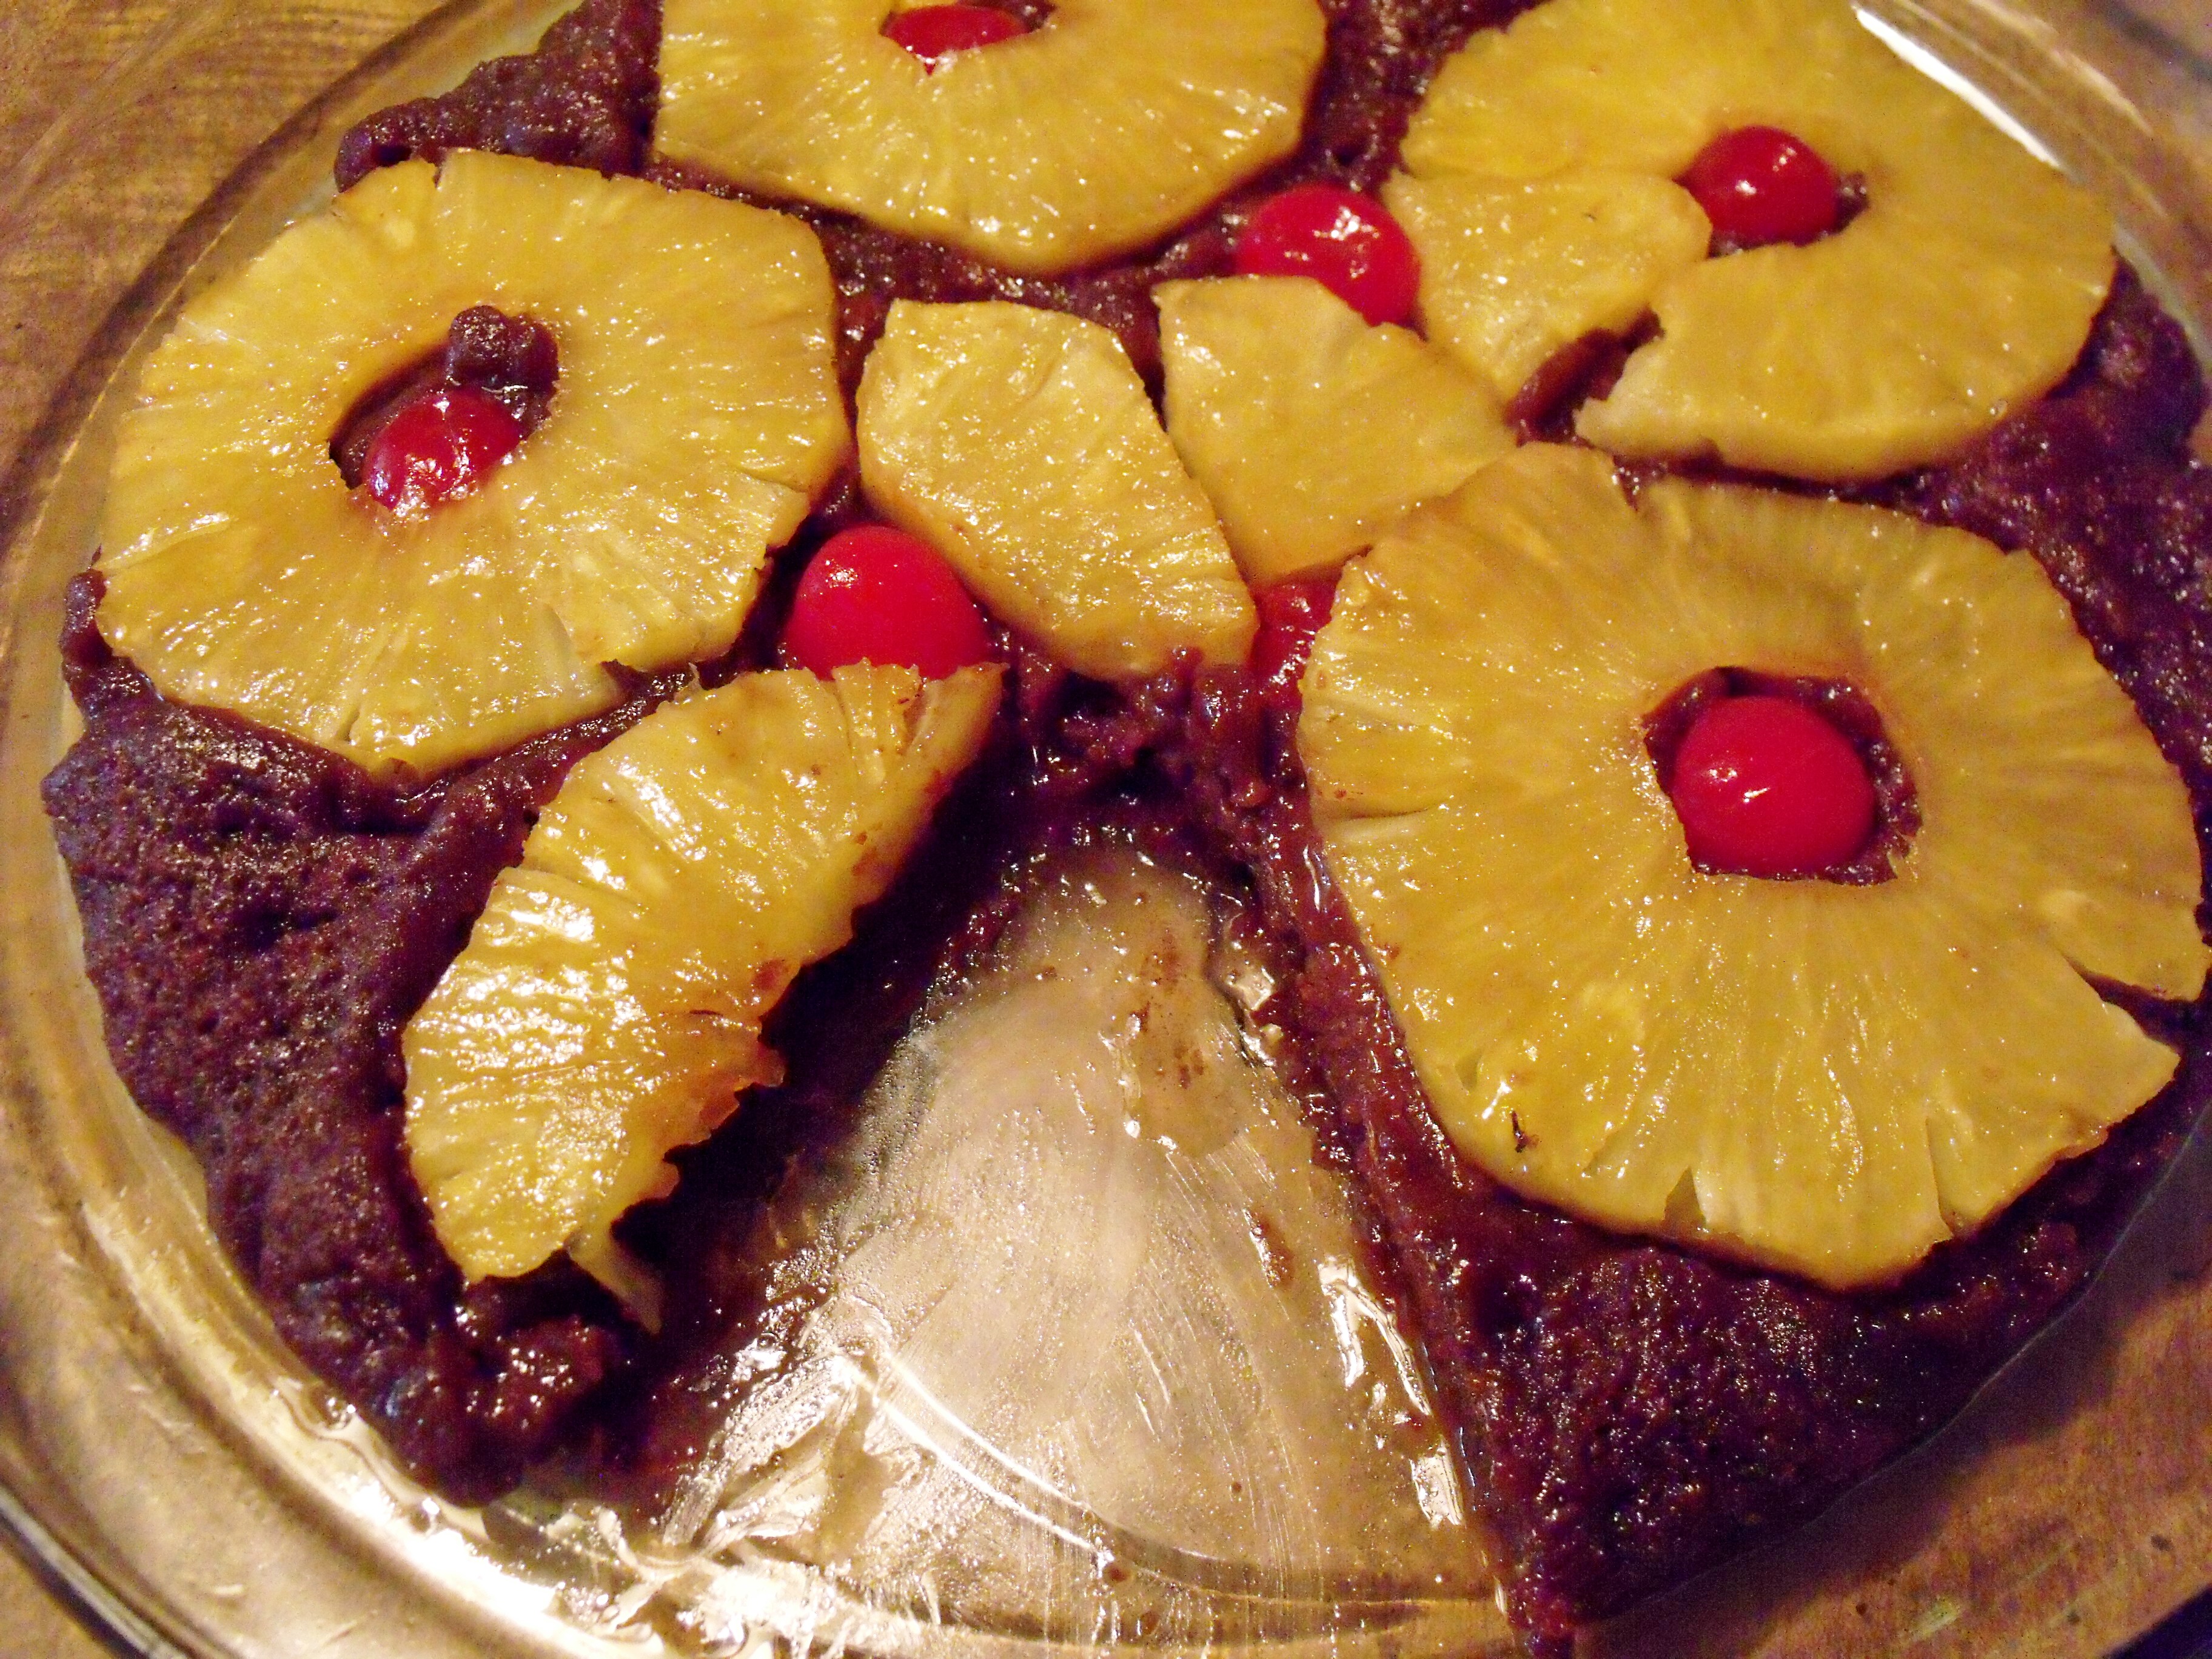 Pineapple Upside Down Cake - Confessions of a Chocoholic